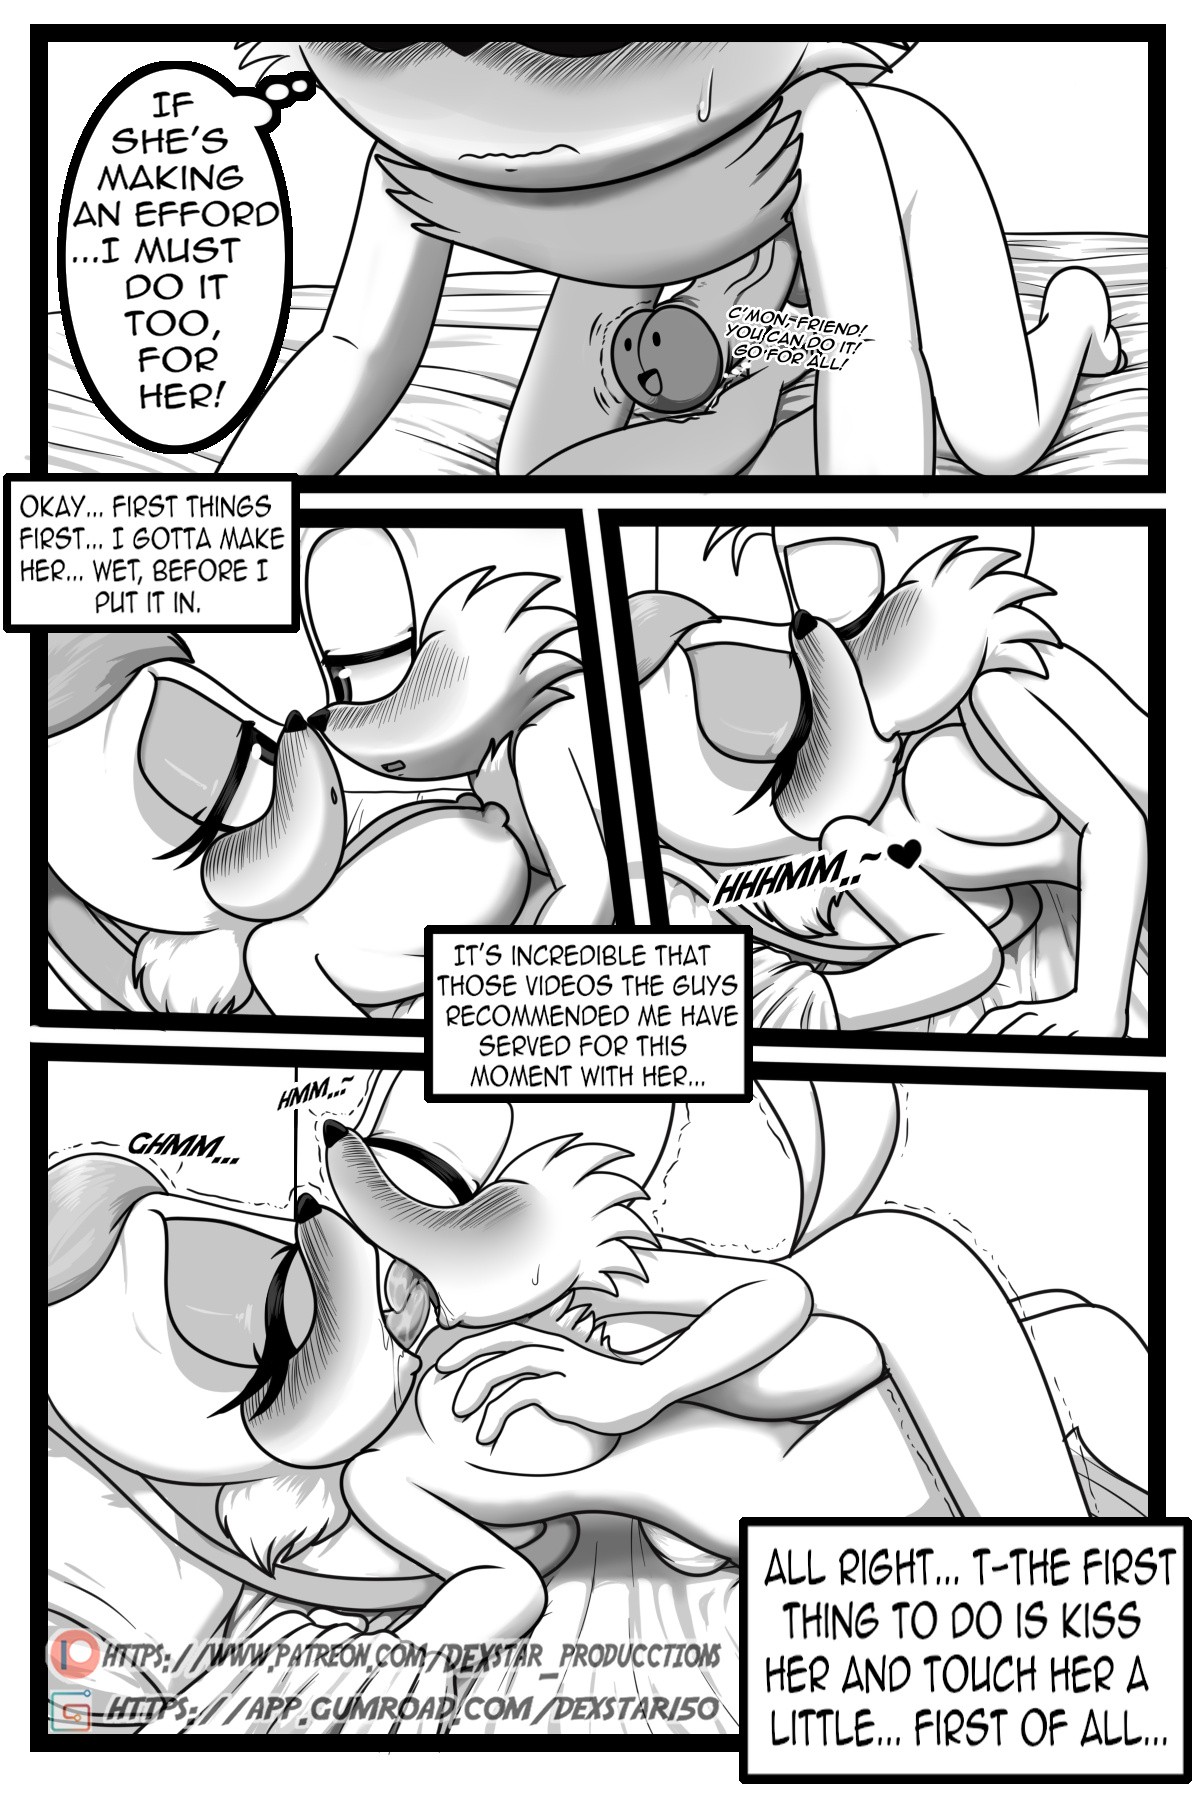 Please Fuck Me: Cream x Tail - Extra Story! porn comic picture 10